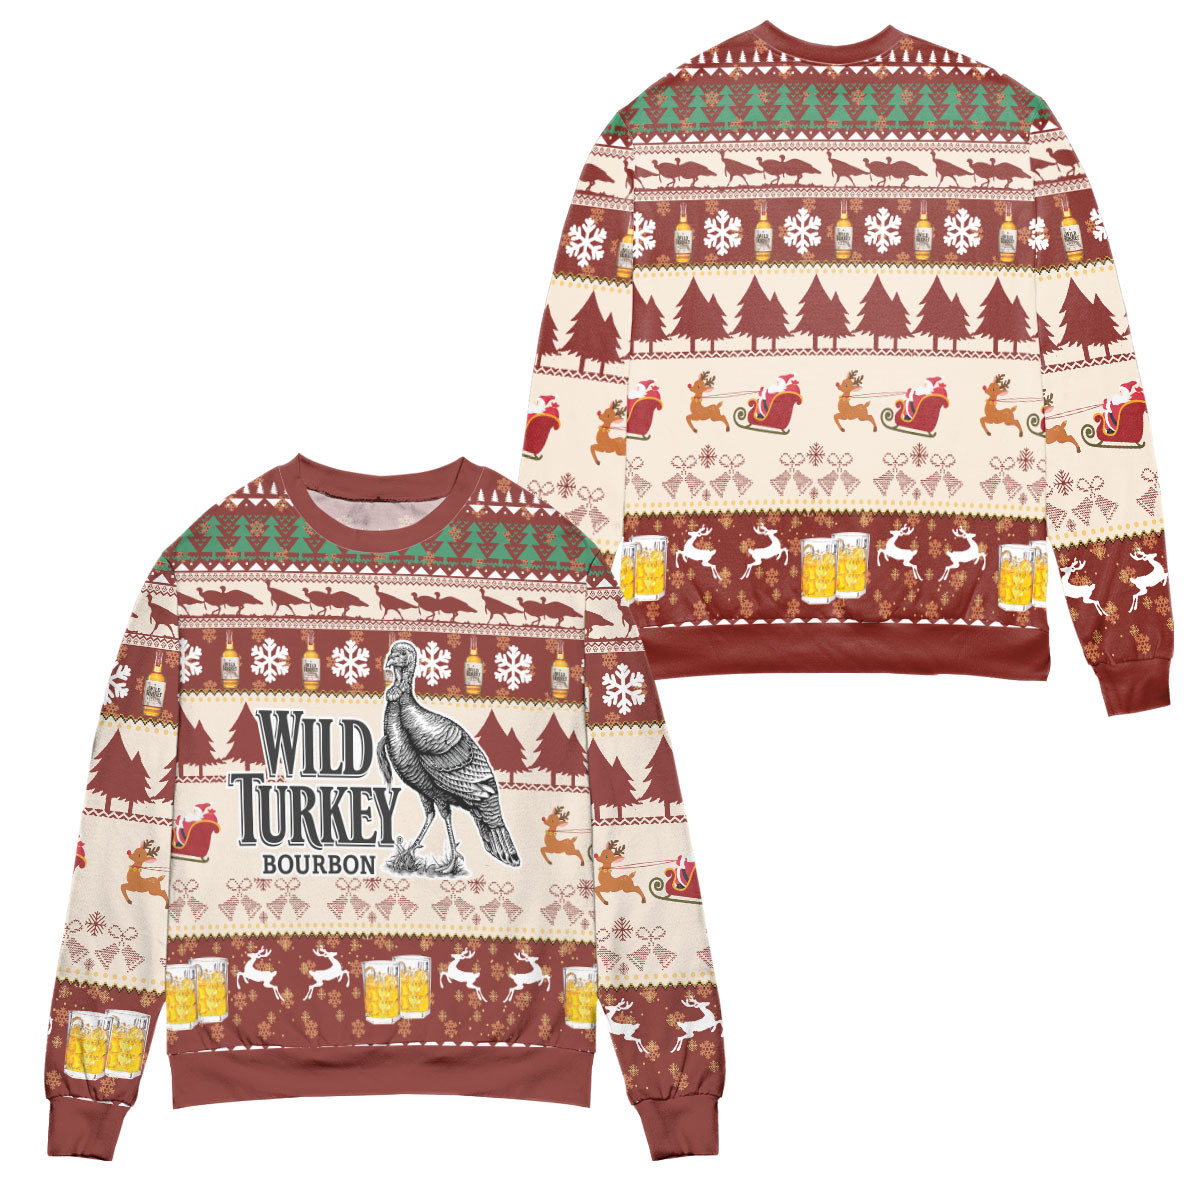 Wild Turkey Bourbon Snowflake Pattern Ugly Christmas Sweater – All Over Print 3D Sweater